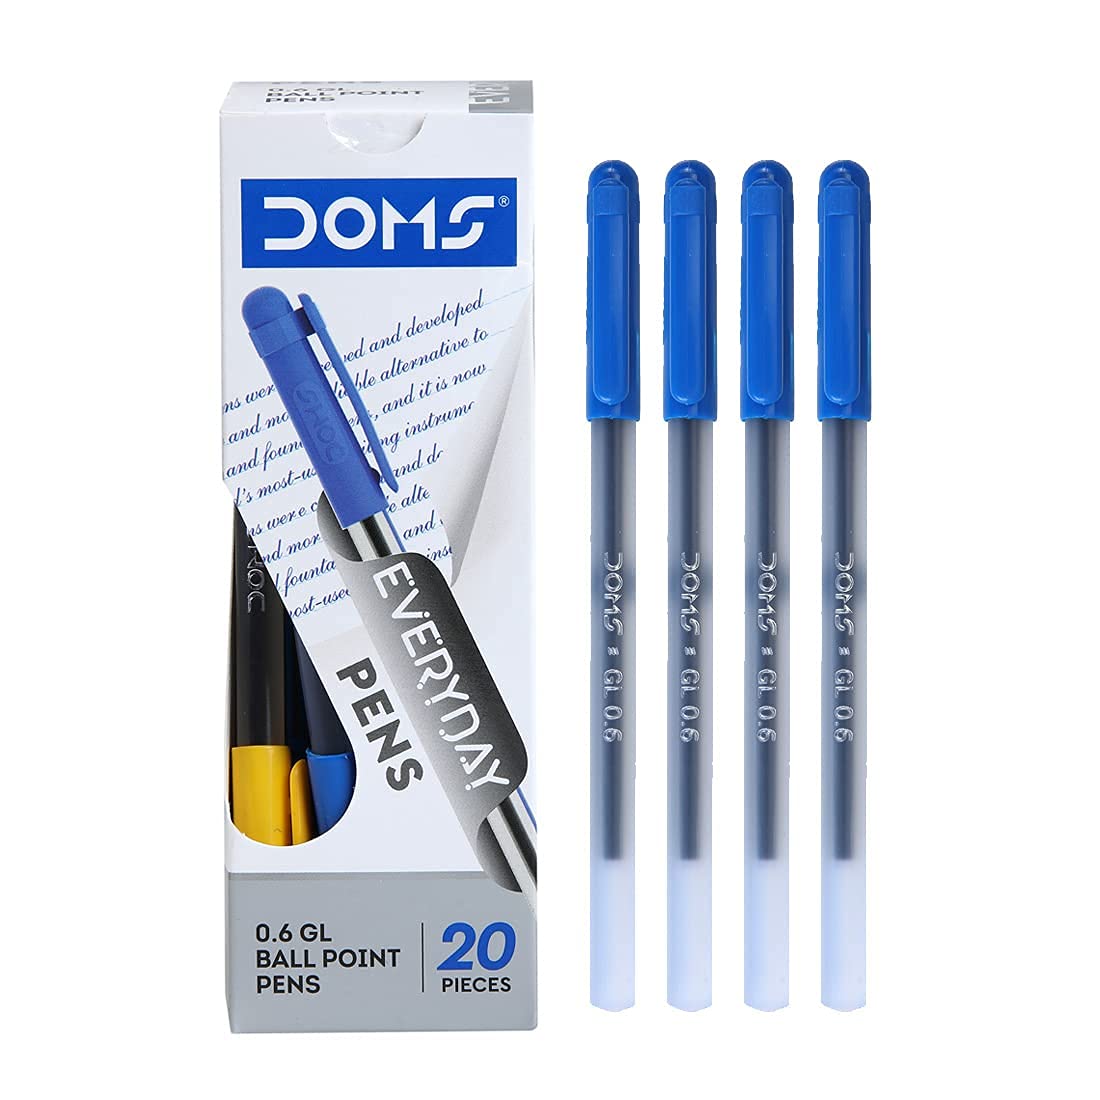 Doms Use & Throw Pen (20 Pieces Per Pack) (Blue)